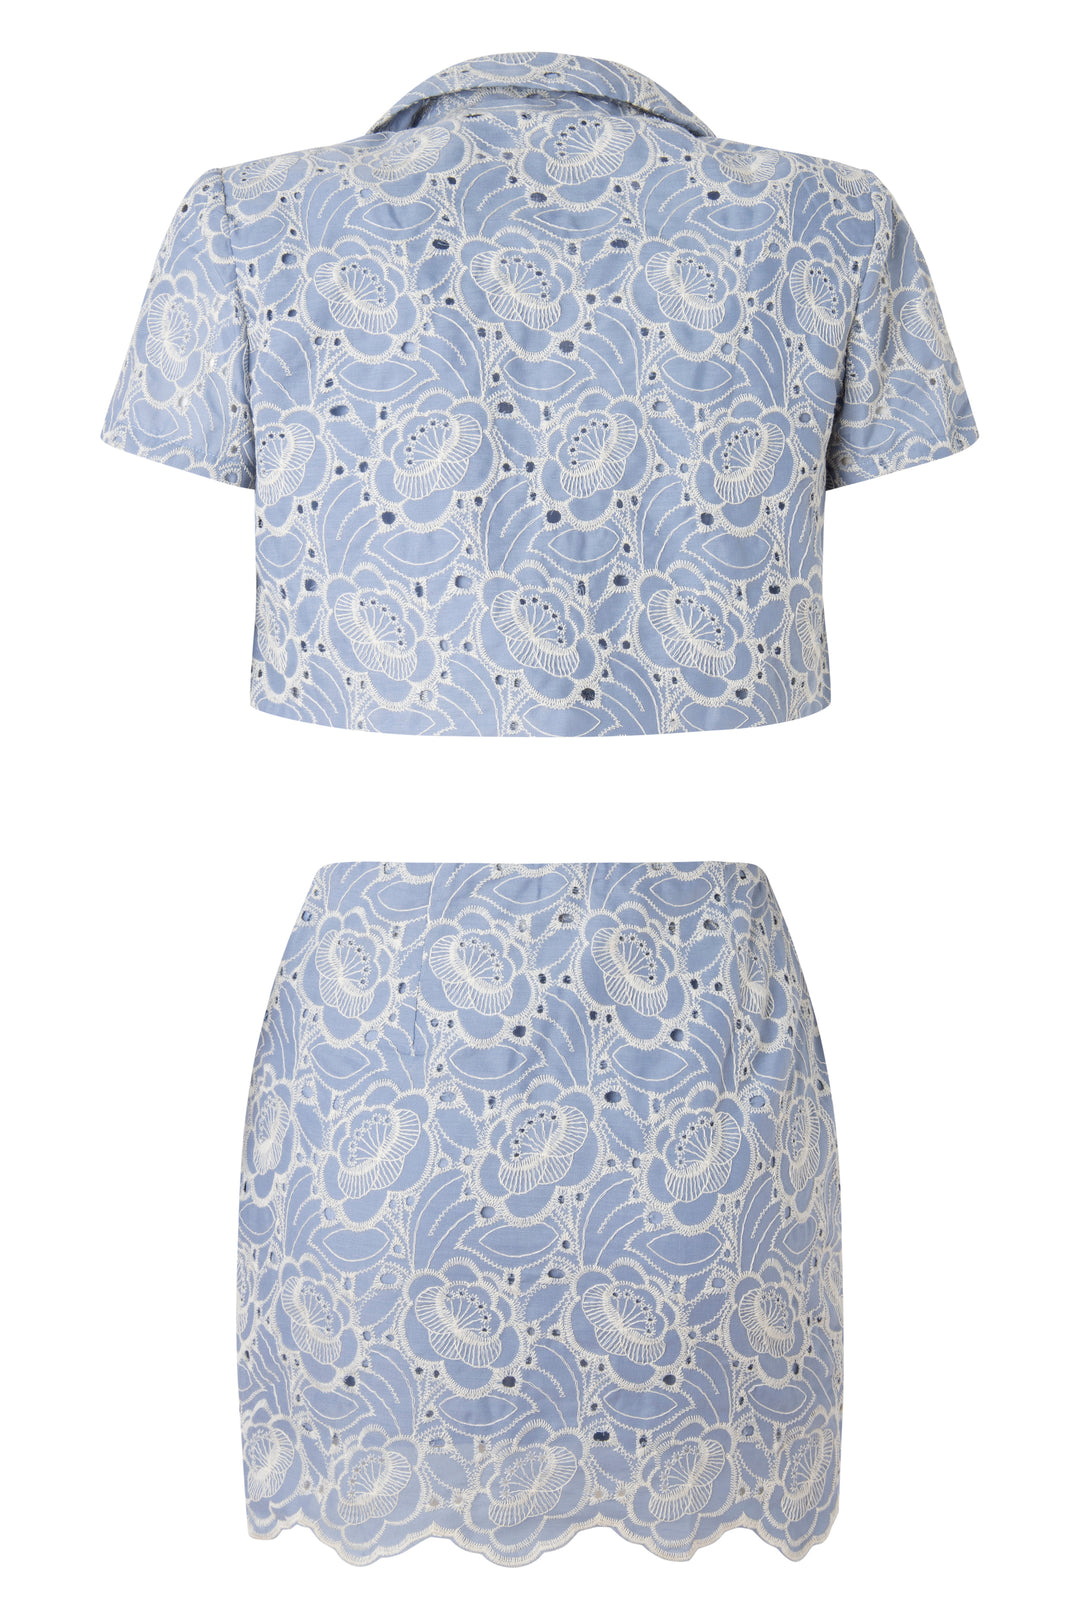 "Topaz" Embroidered Mini Skirt, Bralet & Cropped Jacket 3 Piece - Blue